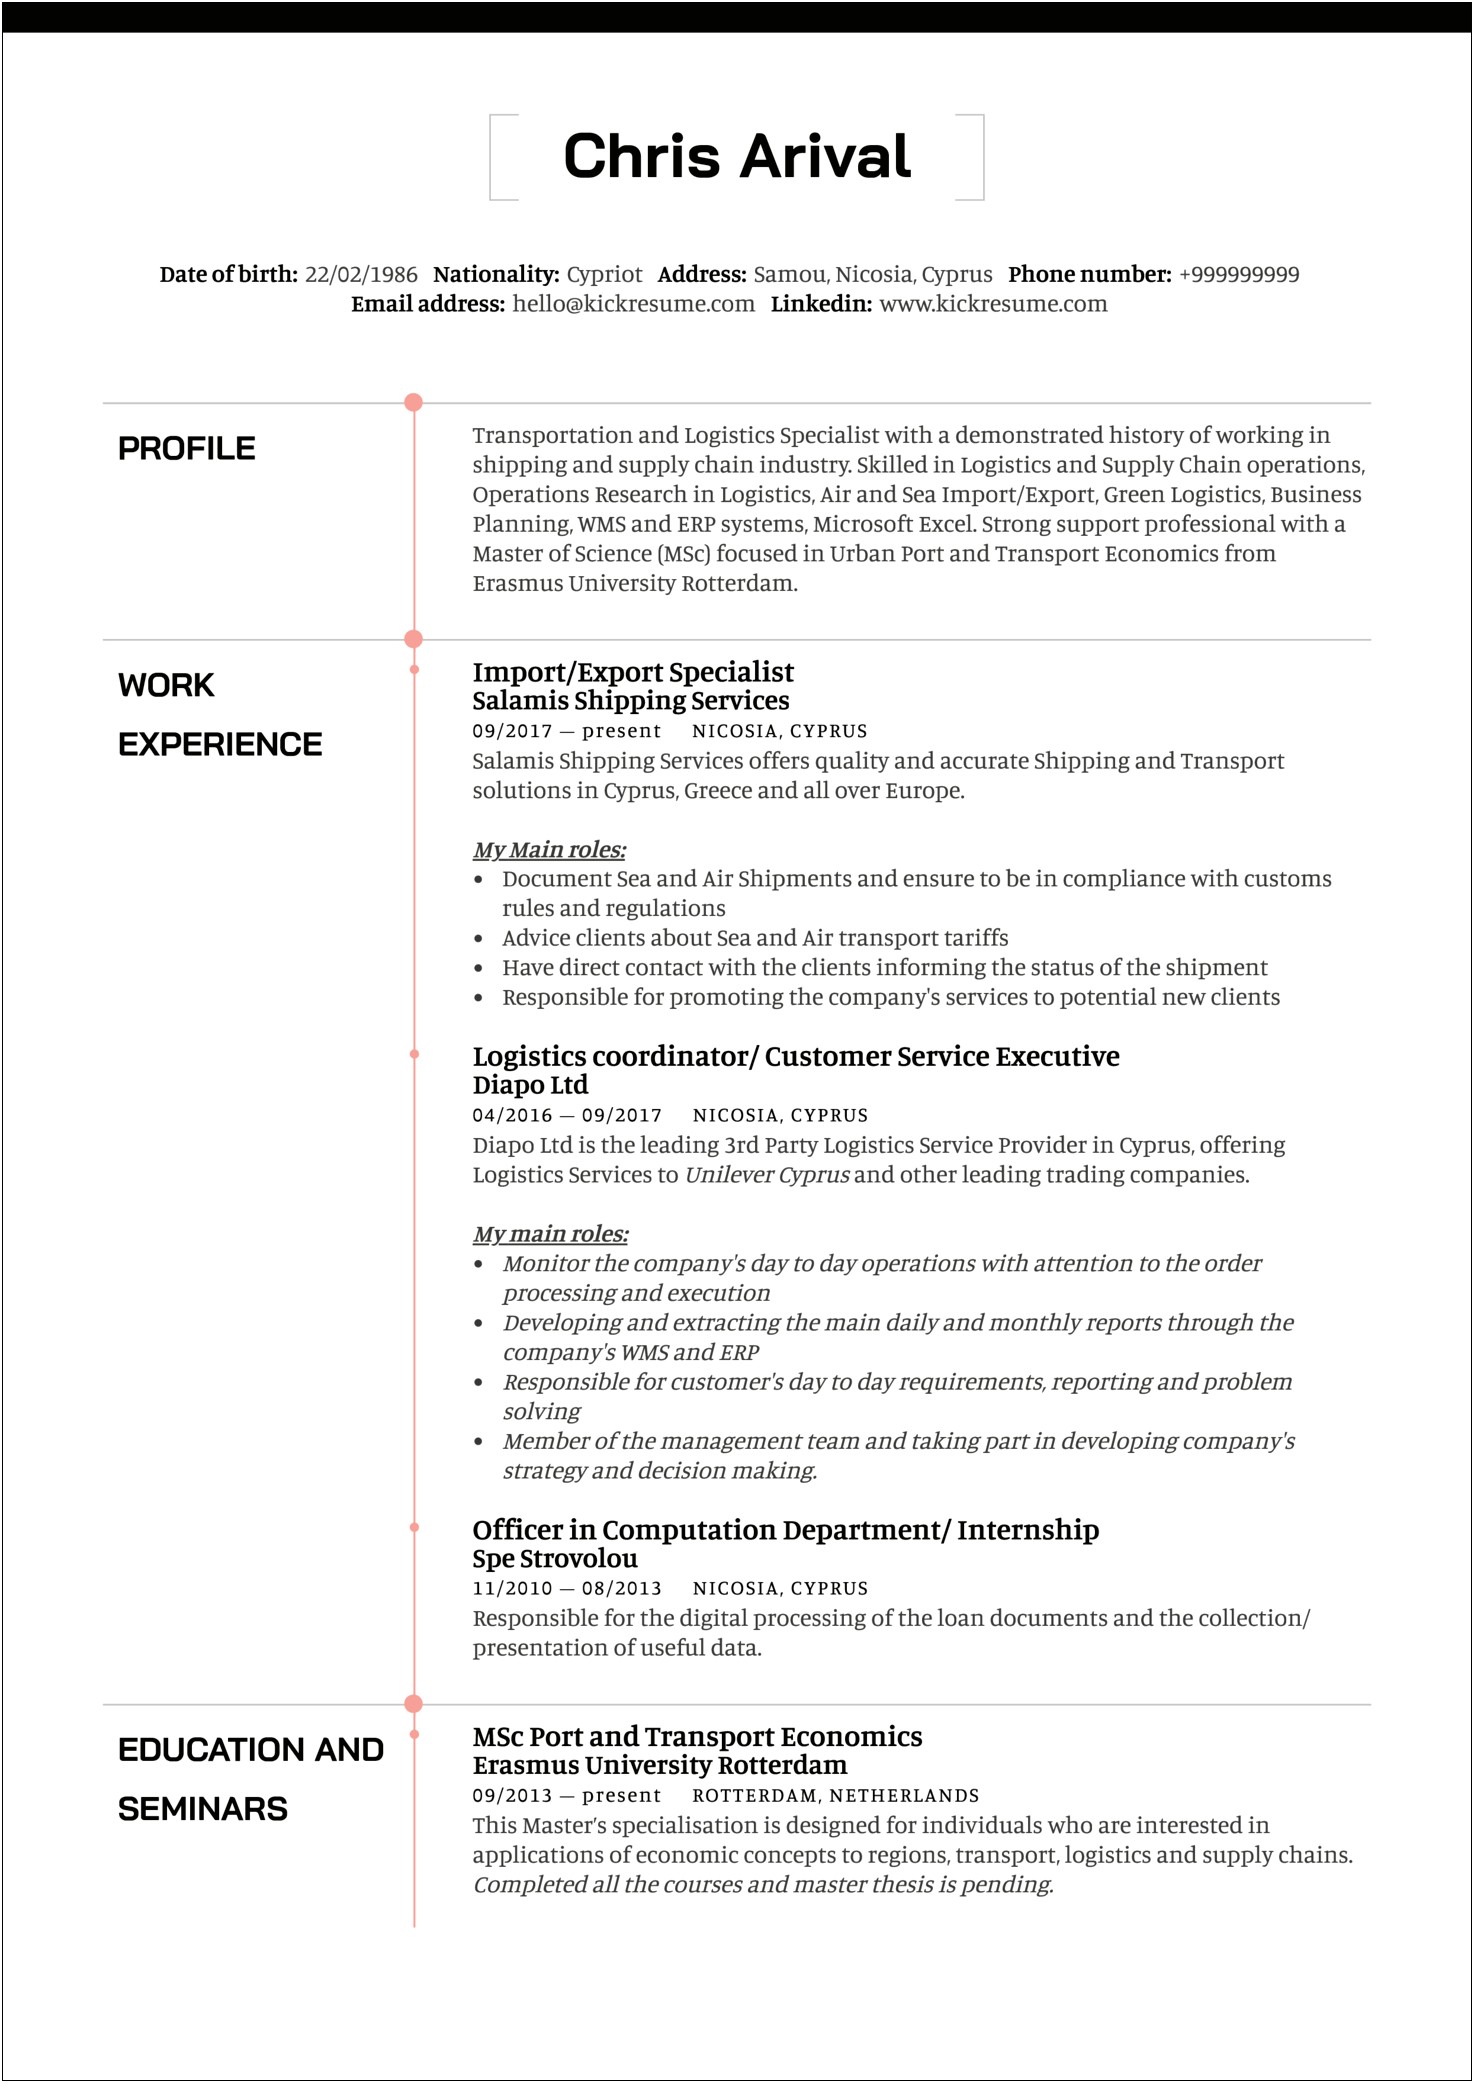 Manager Direct Report Promotion On Resume